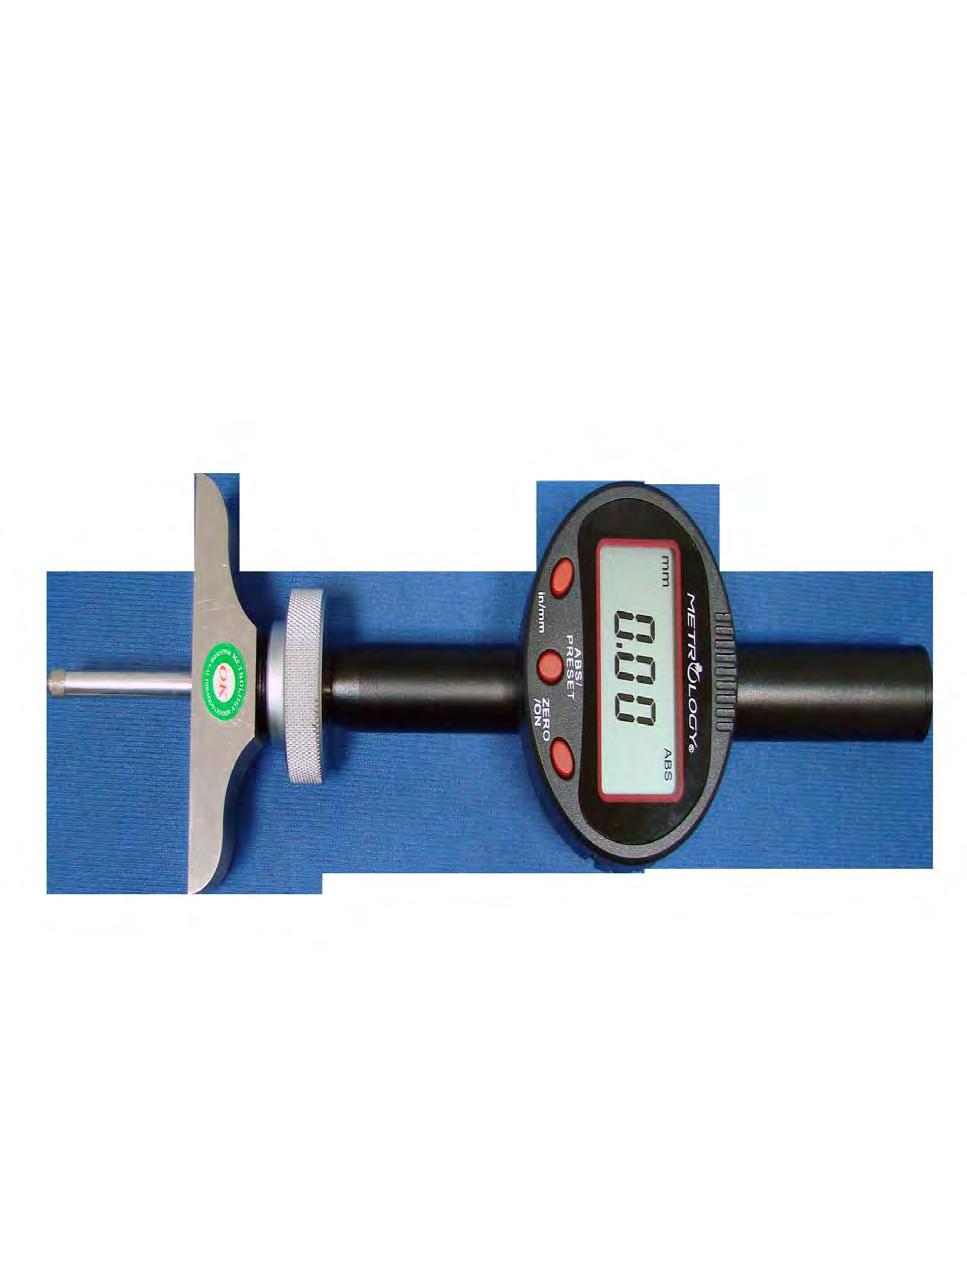 Digital Dial Gauge (Standard) Suitable for pairing up with measuring stands to measure depth, thickness, height,